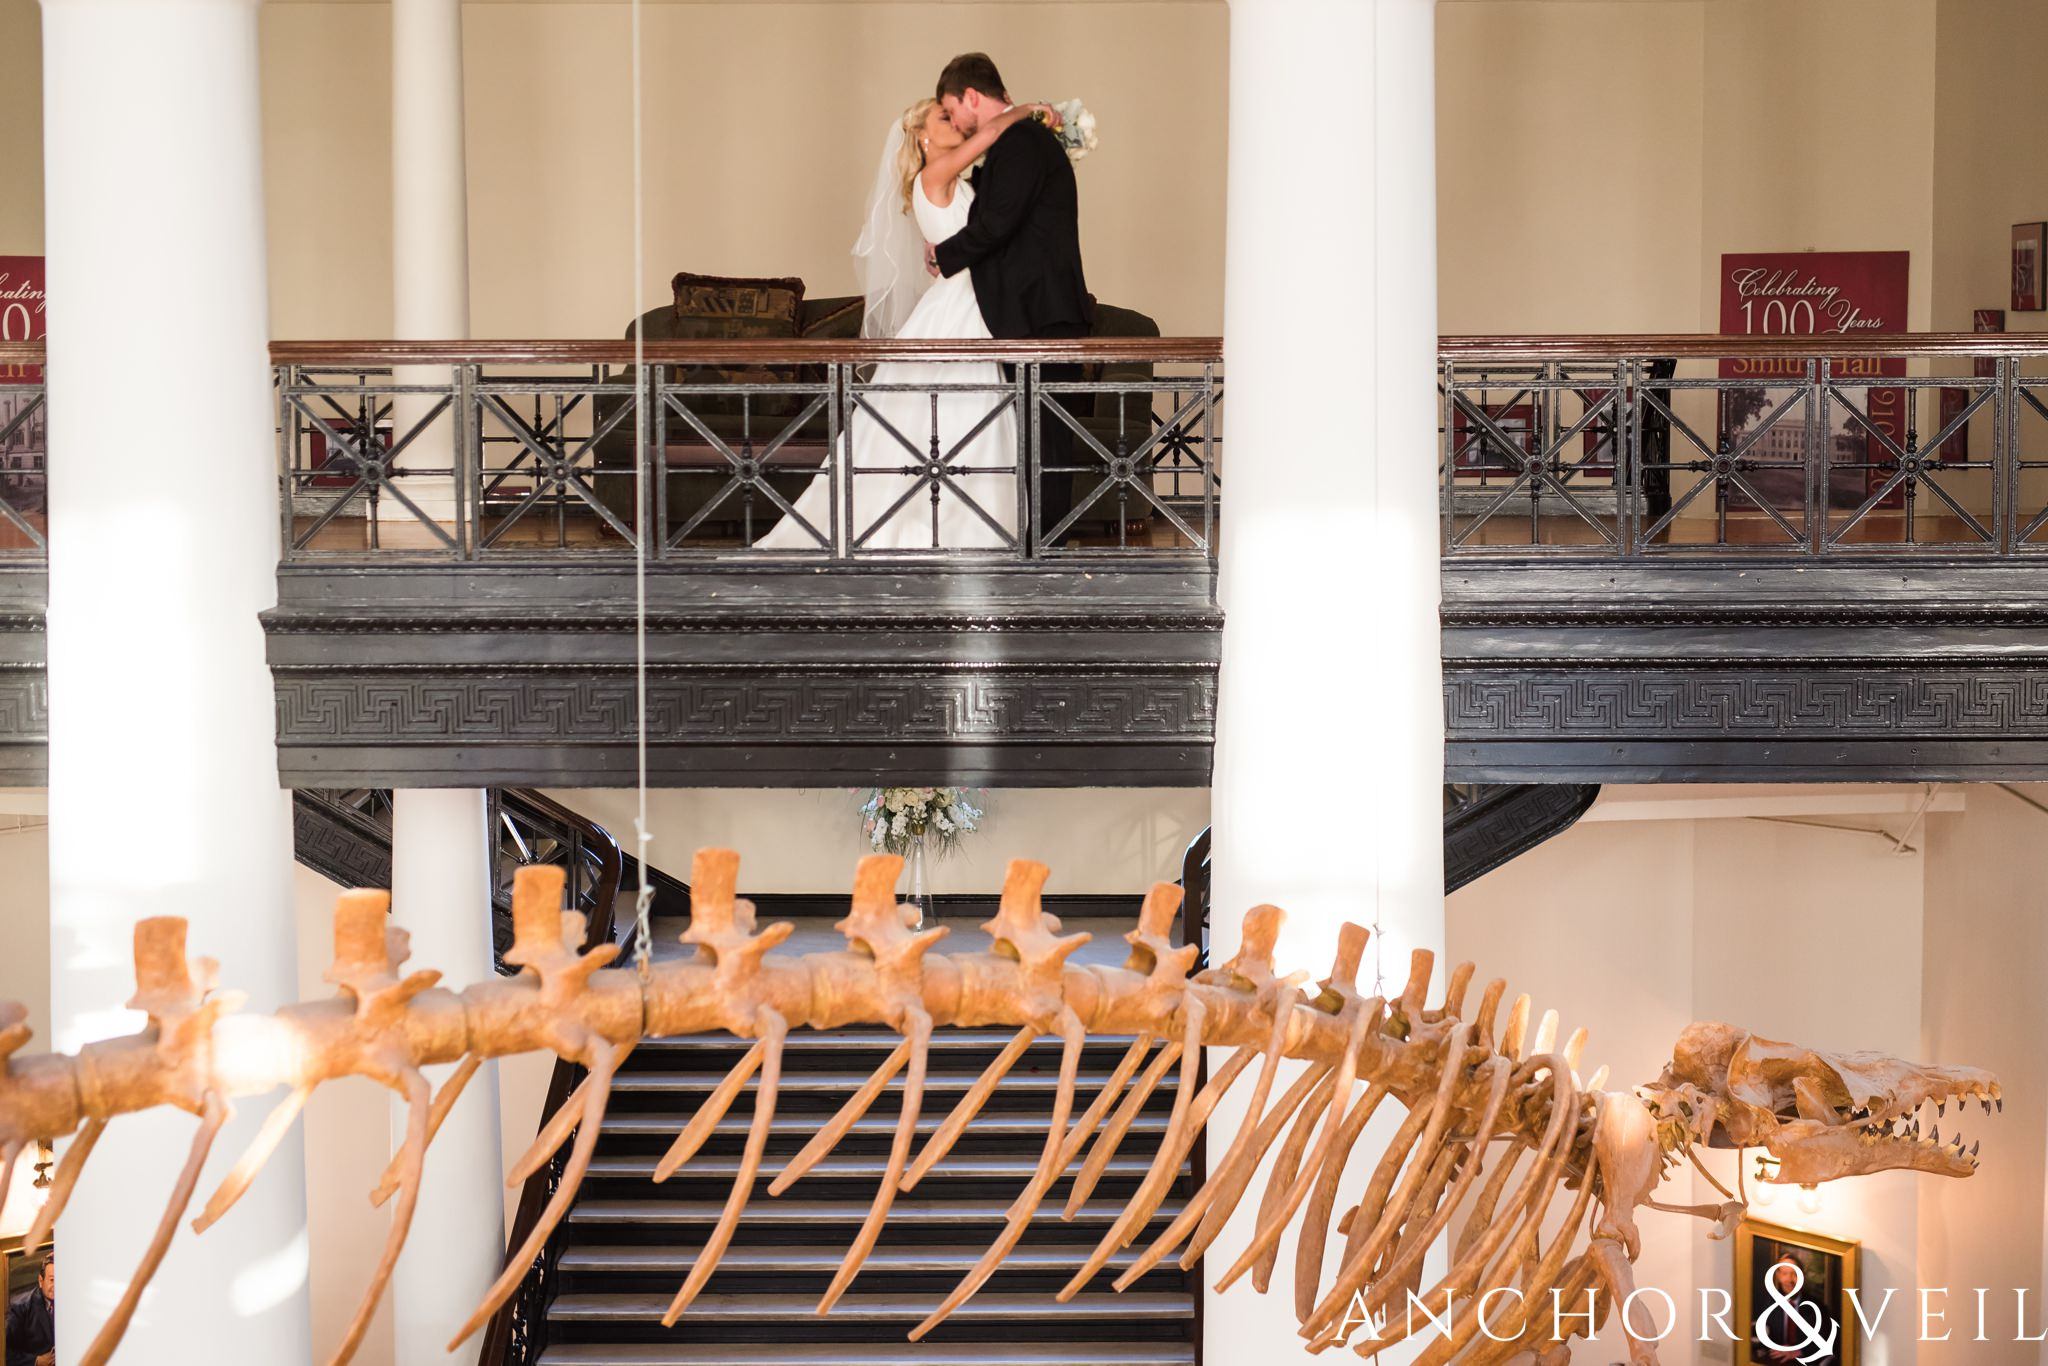 standing over the dinosaur during their Alabama Museum of Natural History Wedding